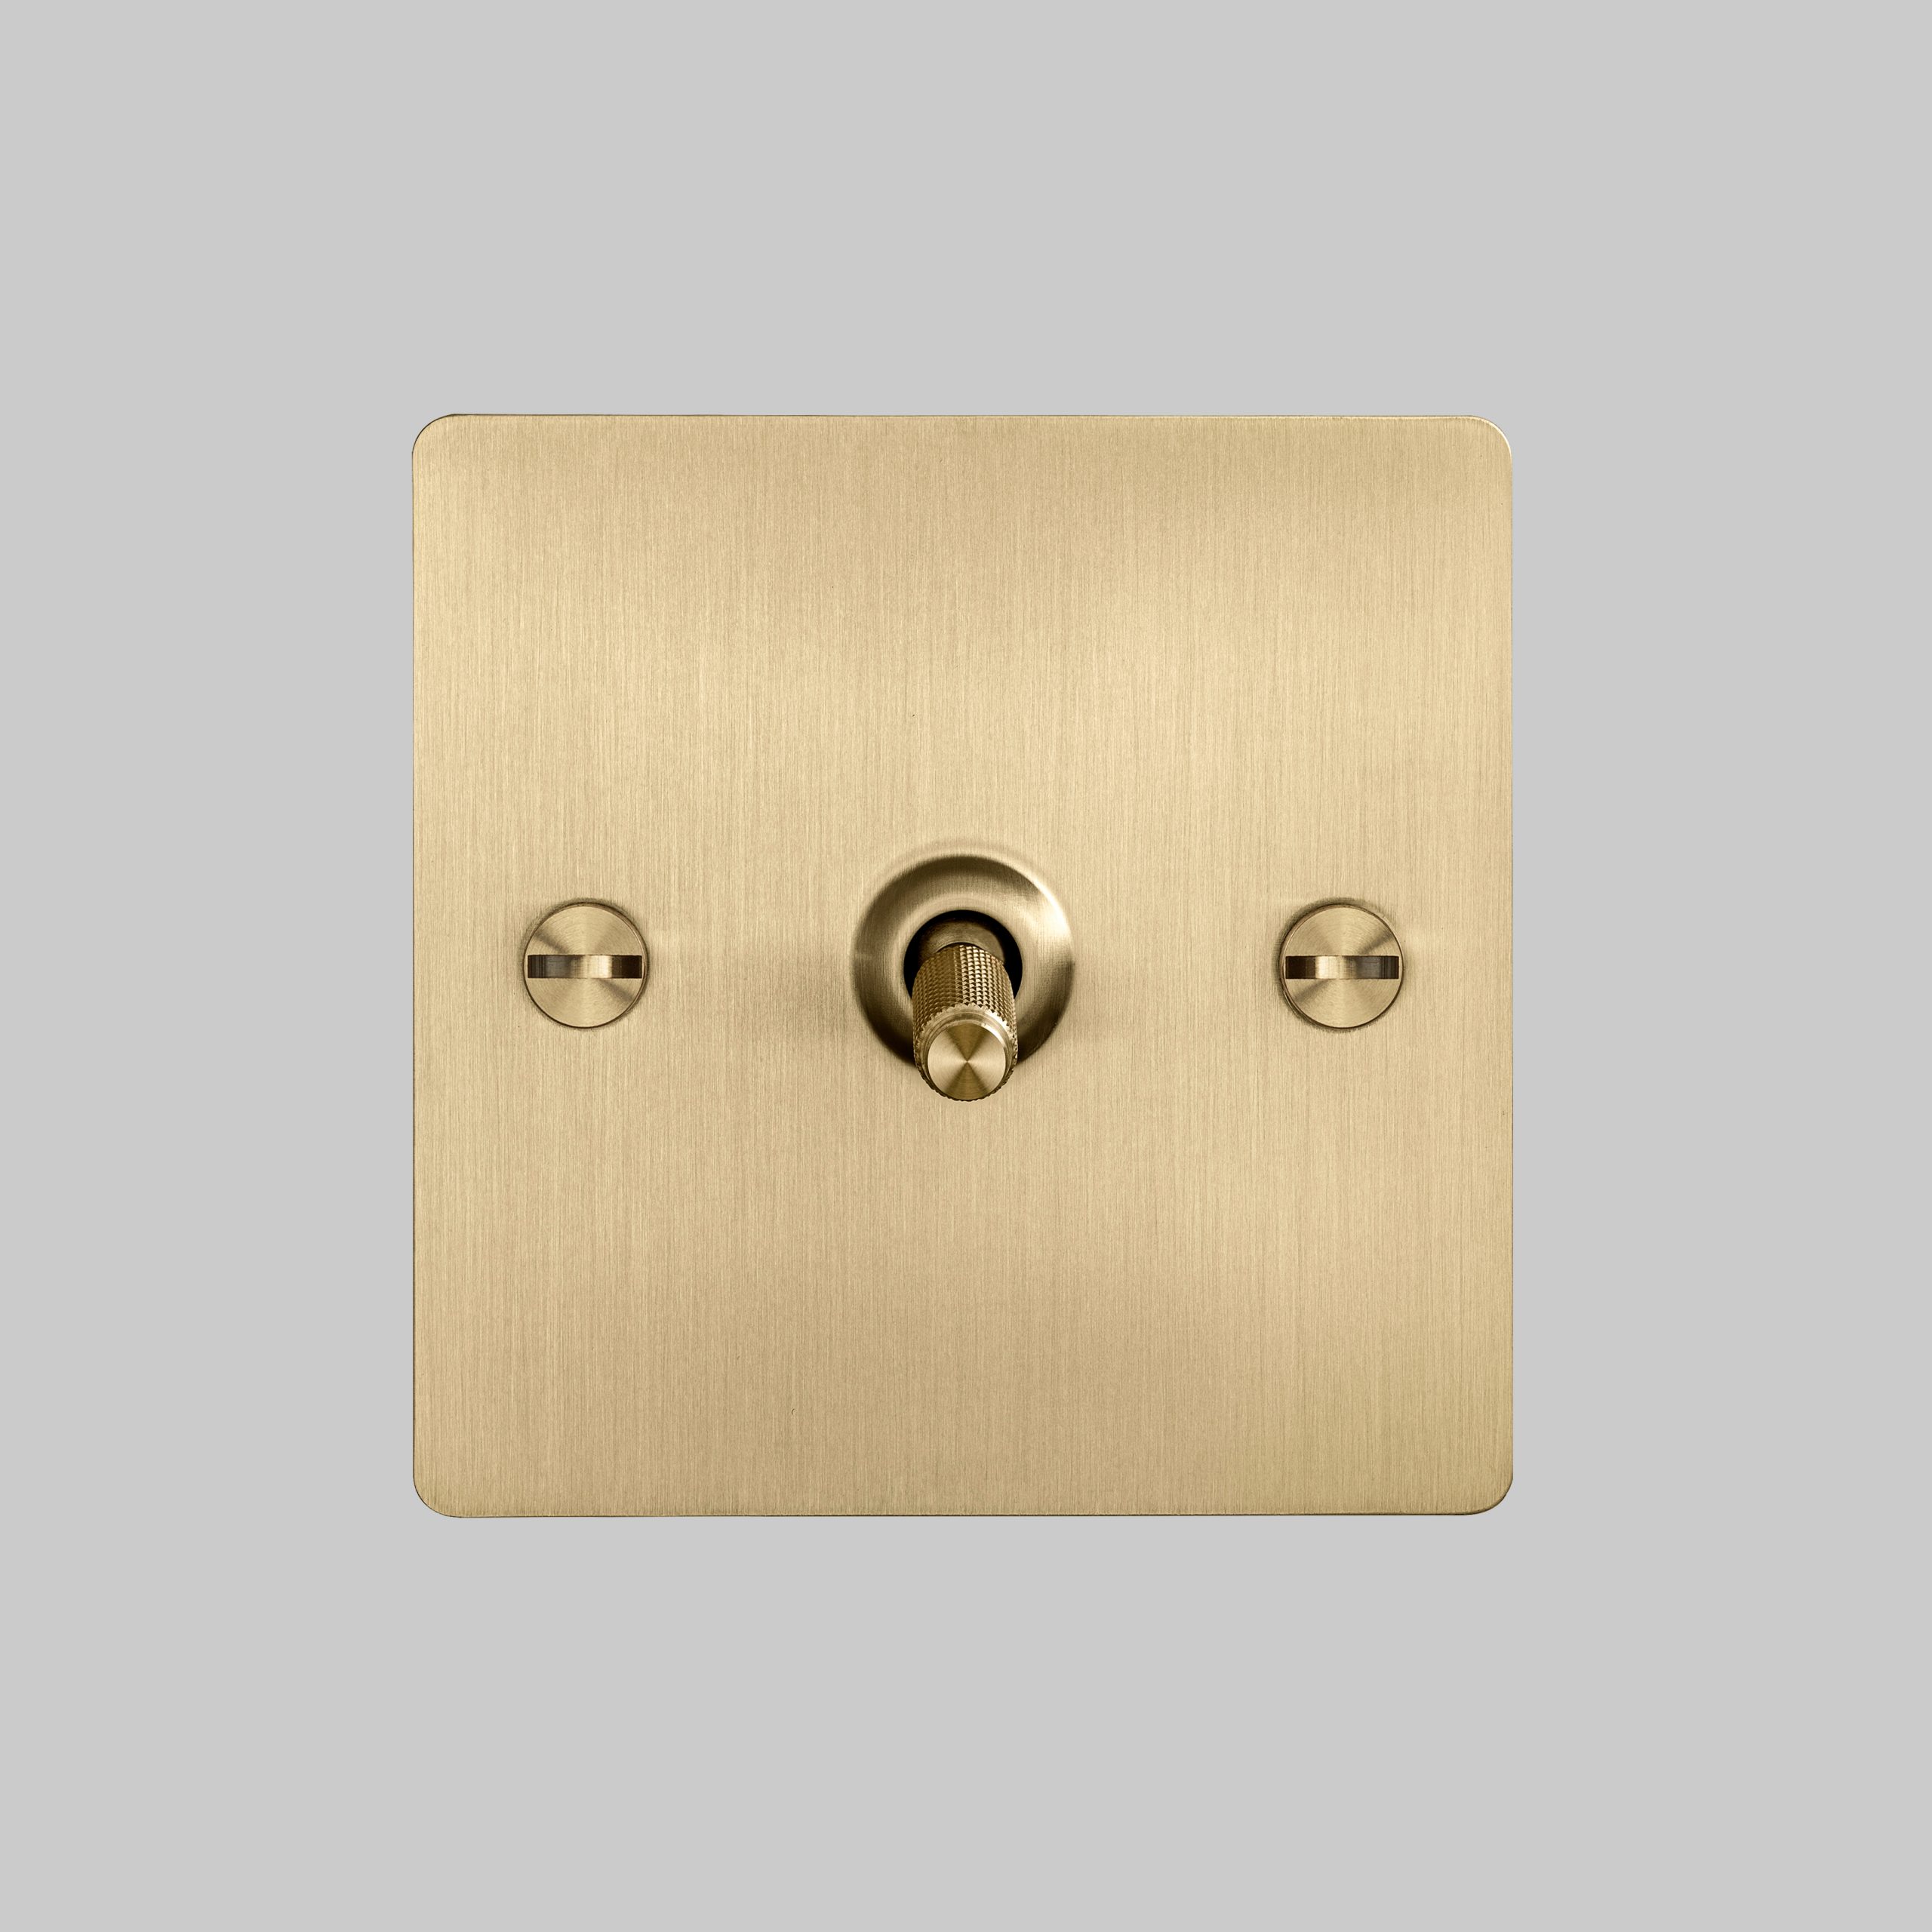 BRASS TOGGLE LIGHT SWITCH / 1G TOGGLE MADE FROM SOLID KNURLED BRASS